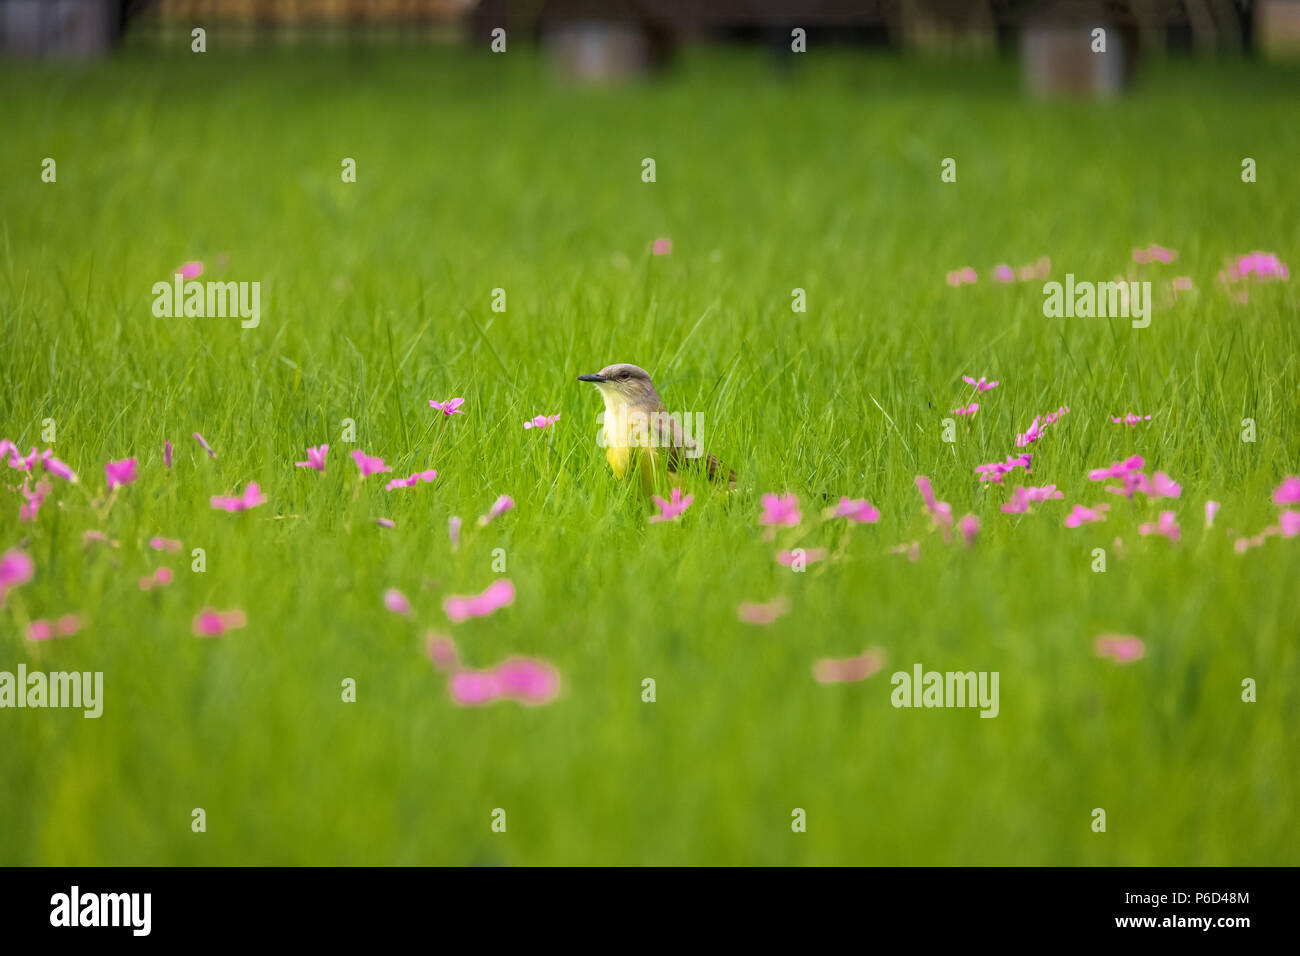 Cattle Tyrant bird (Machetornis rixosa) on a high grass green field with pink flowers at Bosques de Palermo (Palermo Woods) - Buenos Aires, Argentina Stock Photo